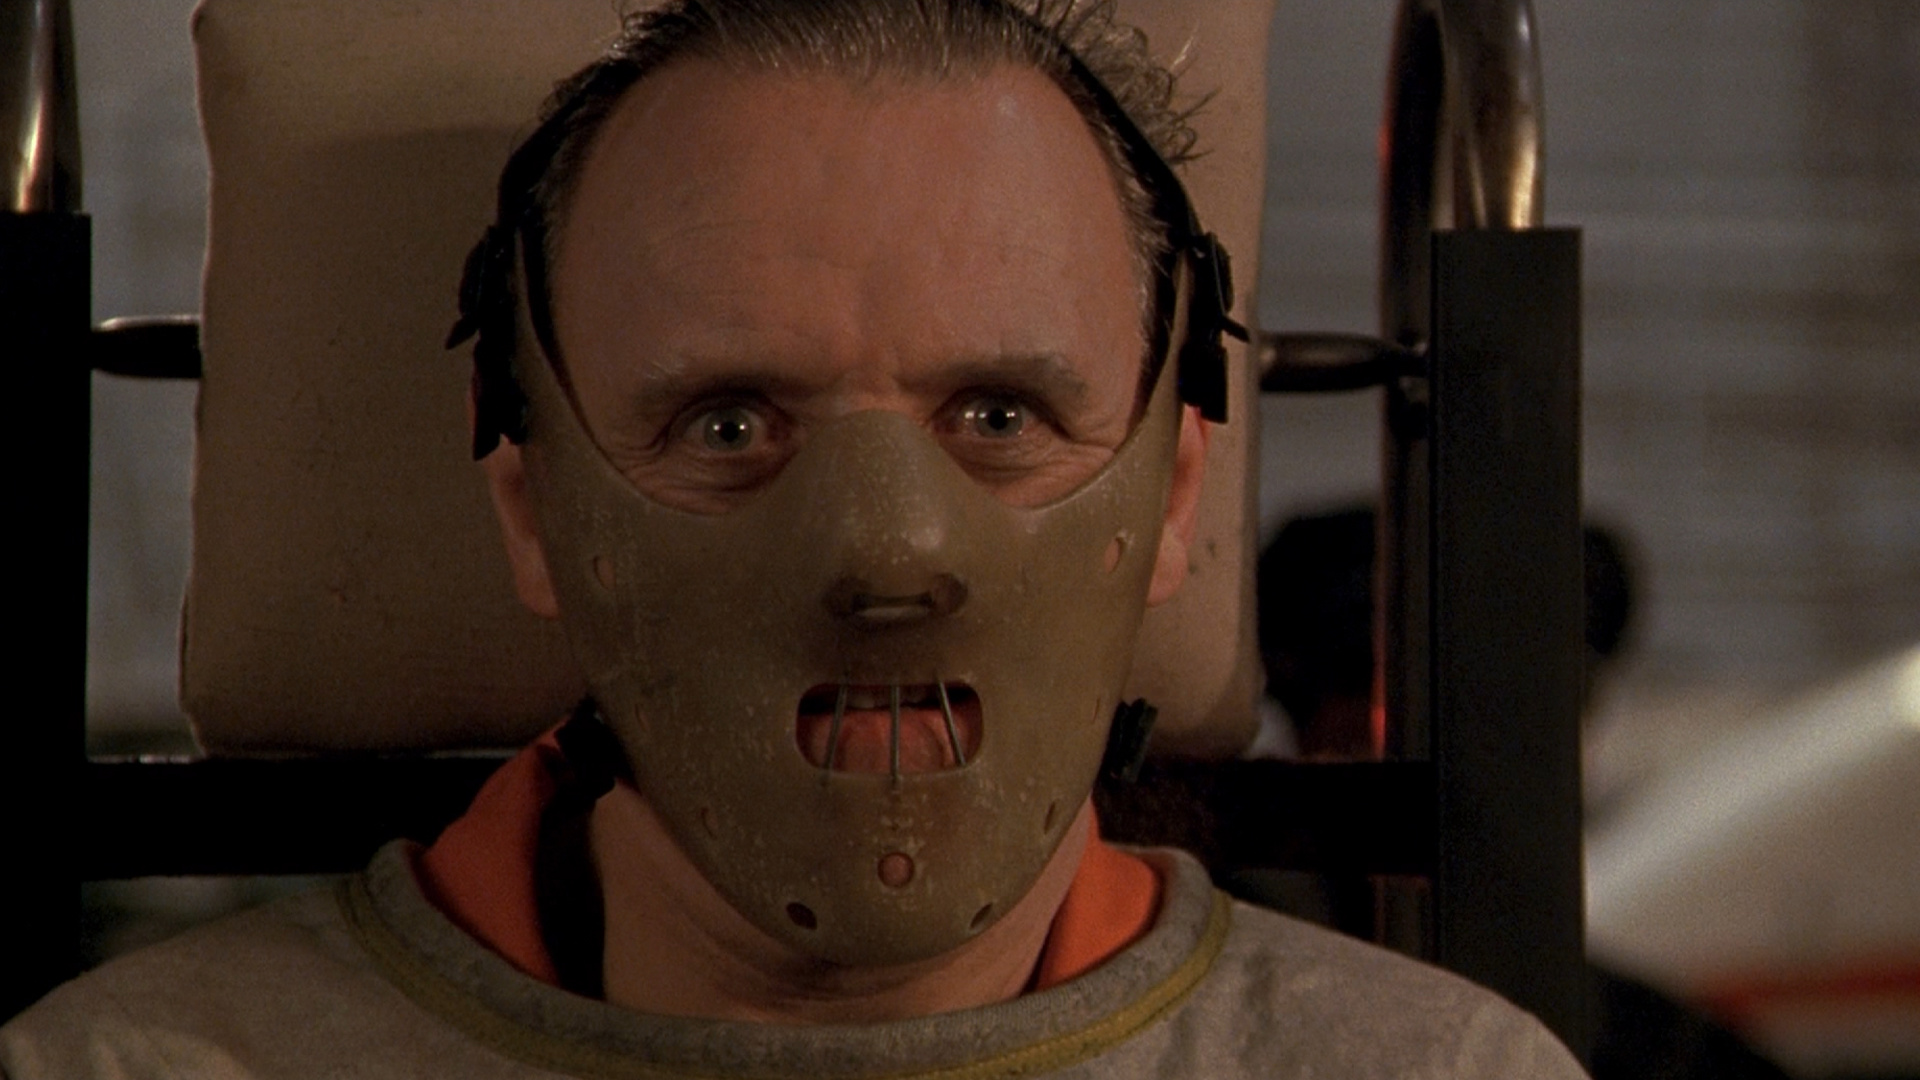 movie, the silence of the lambs